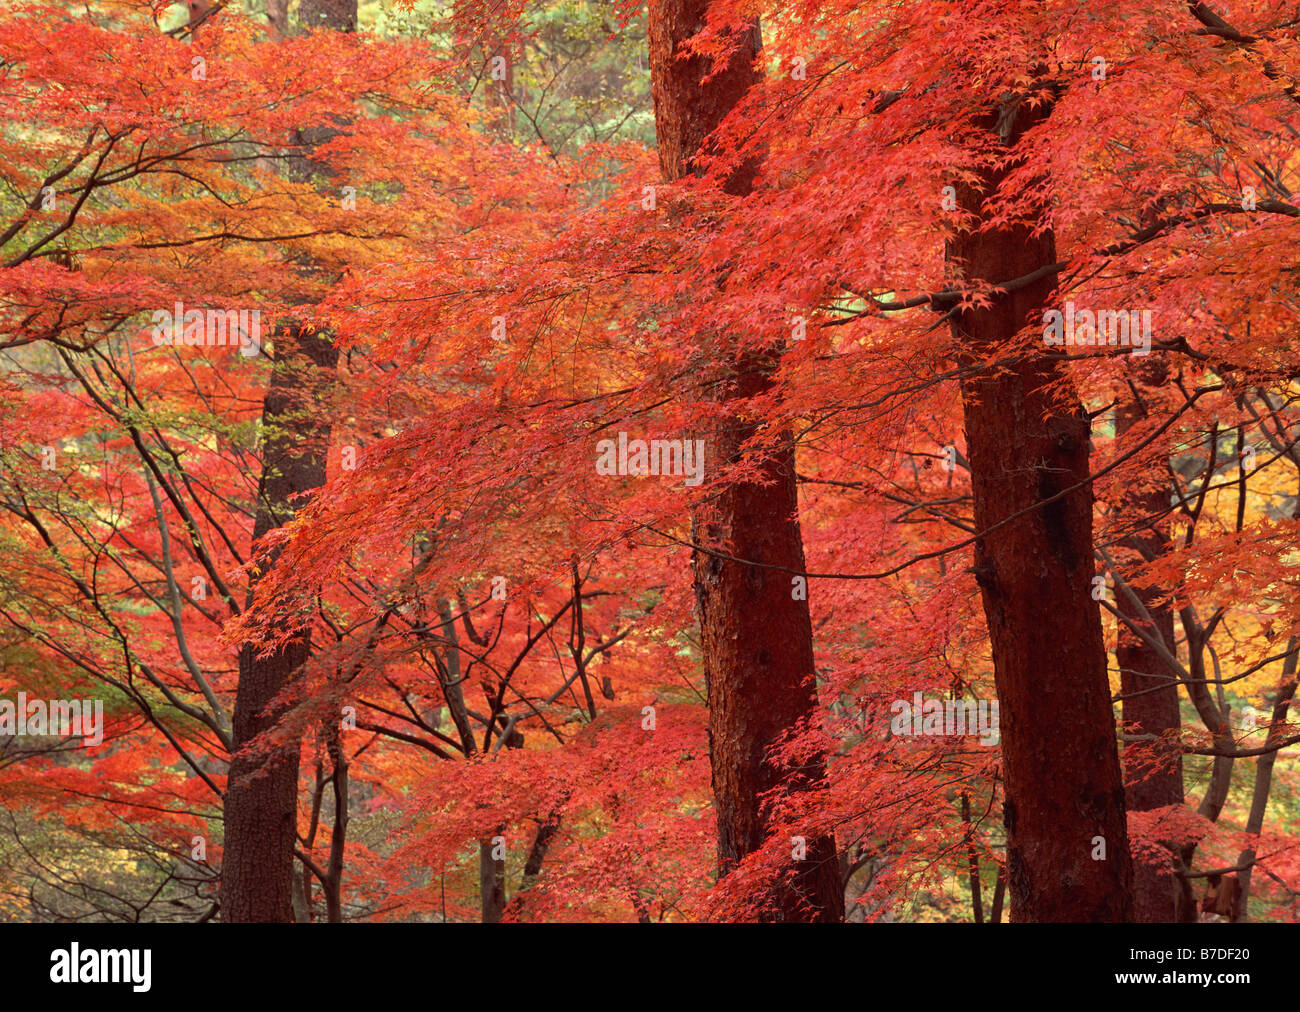 Autumn color of leaves Stock Photo